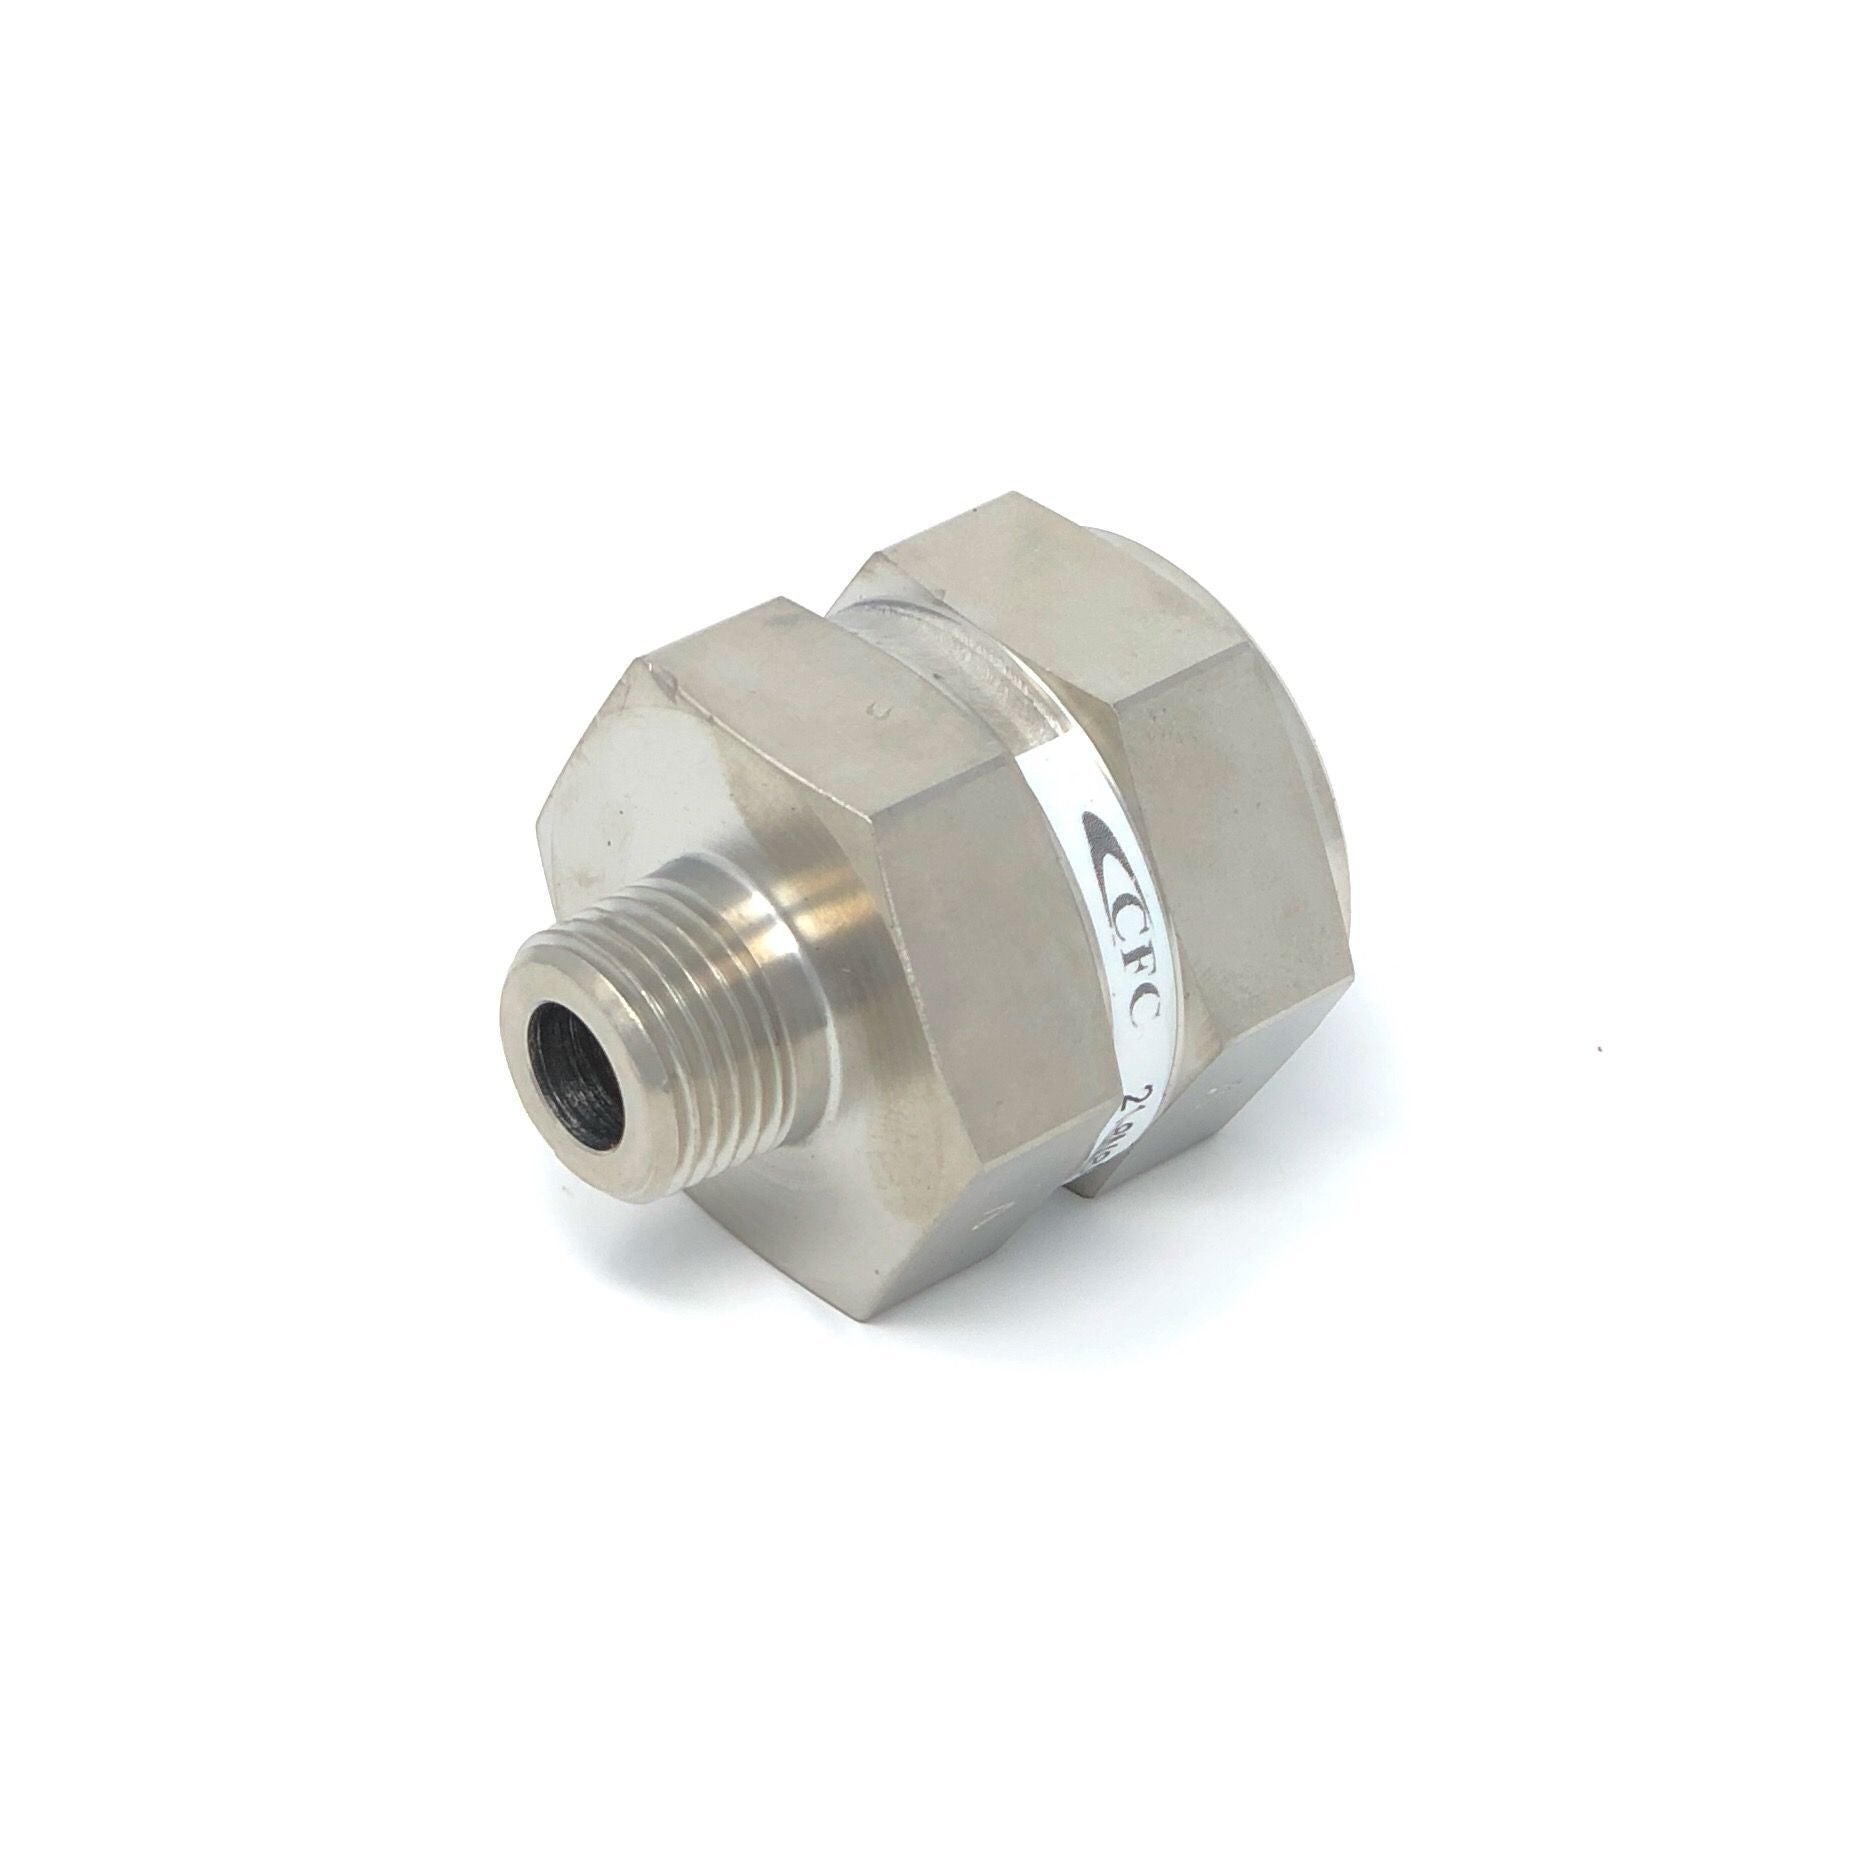 21-4T4T-25S : Chase High Pressure Inline Filter, 6000psi, 1/4" 37 Degree Flare, 25 Micron, No Visual Indicator, No Bypass